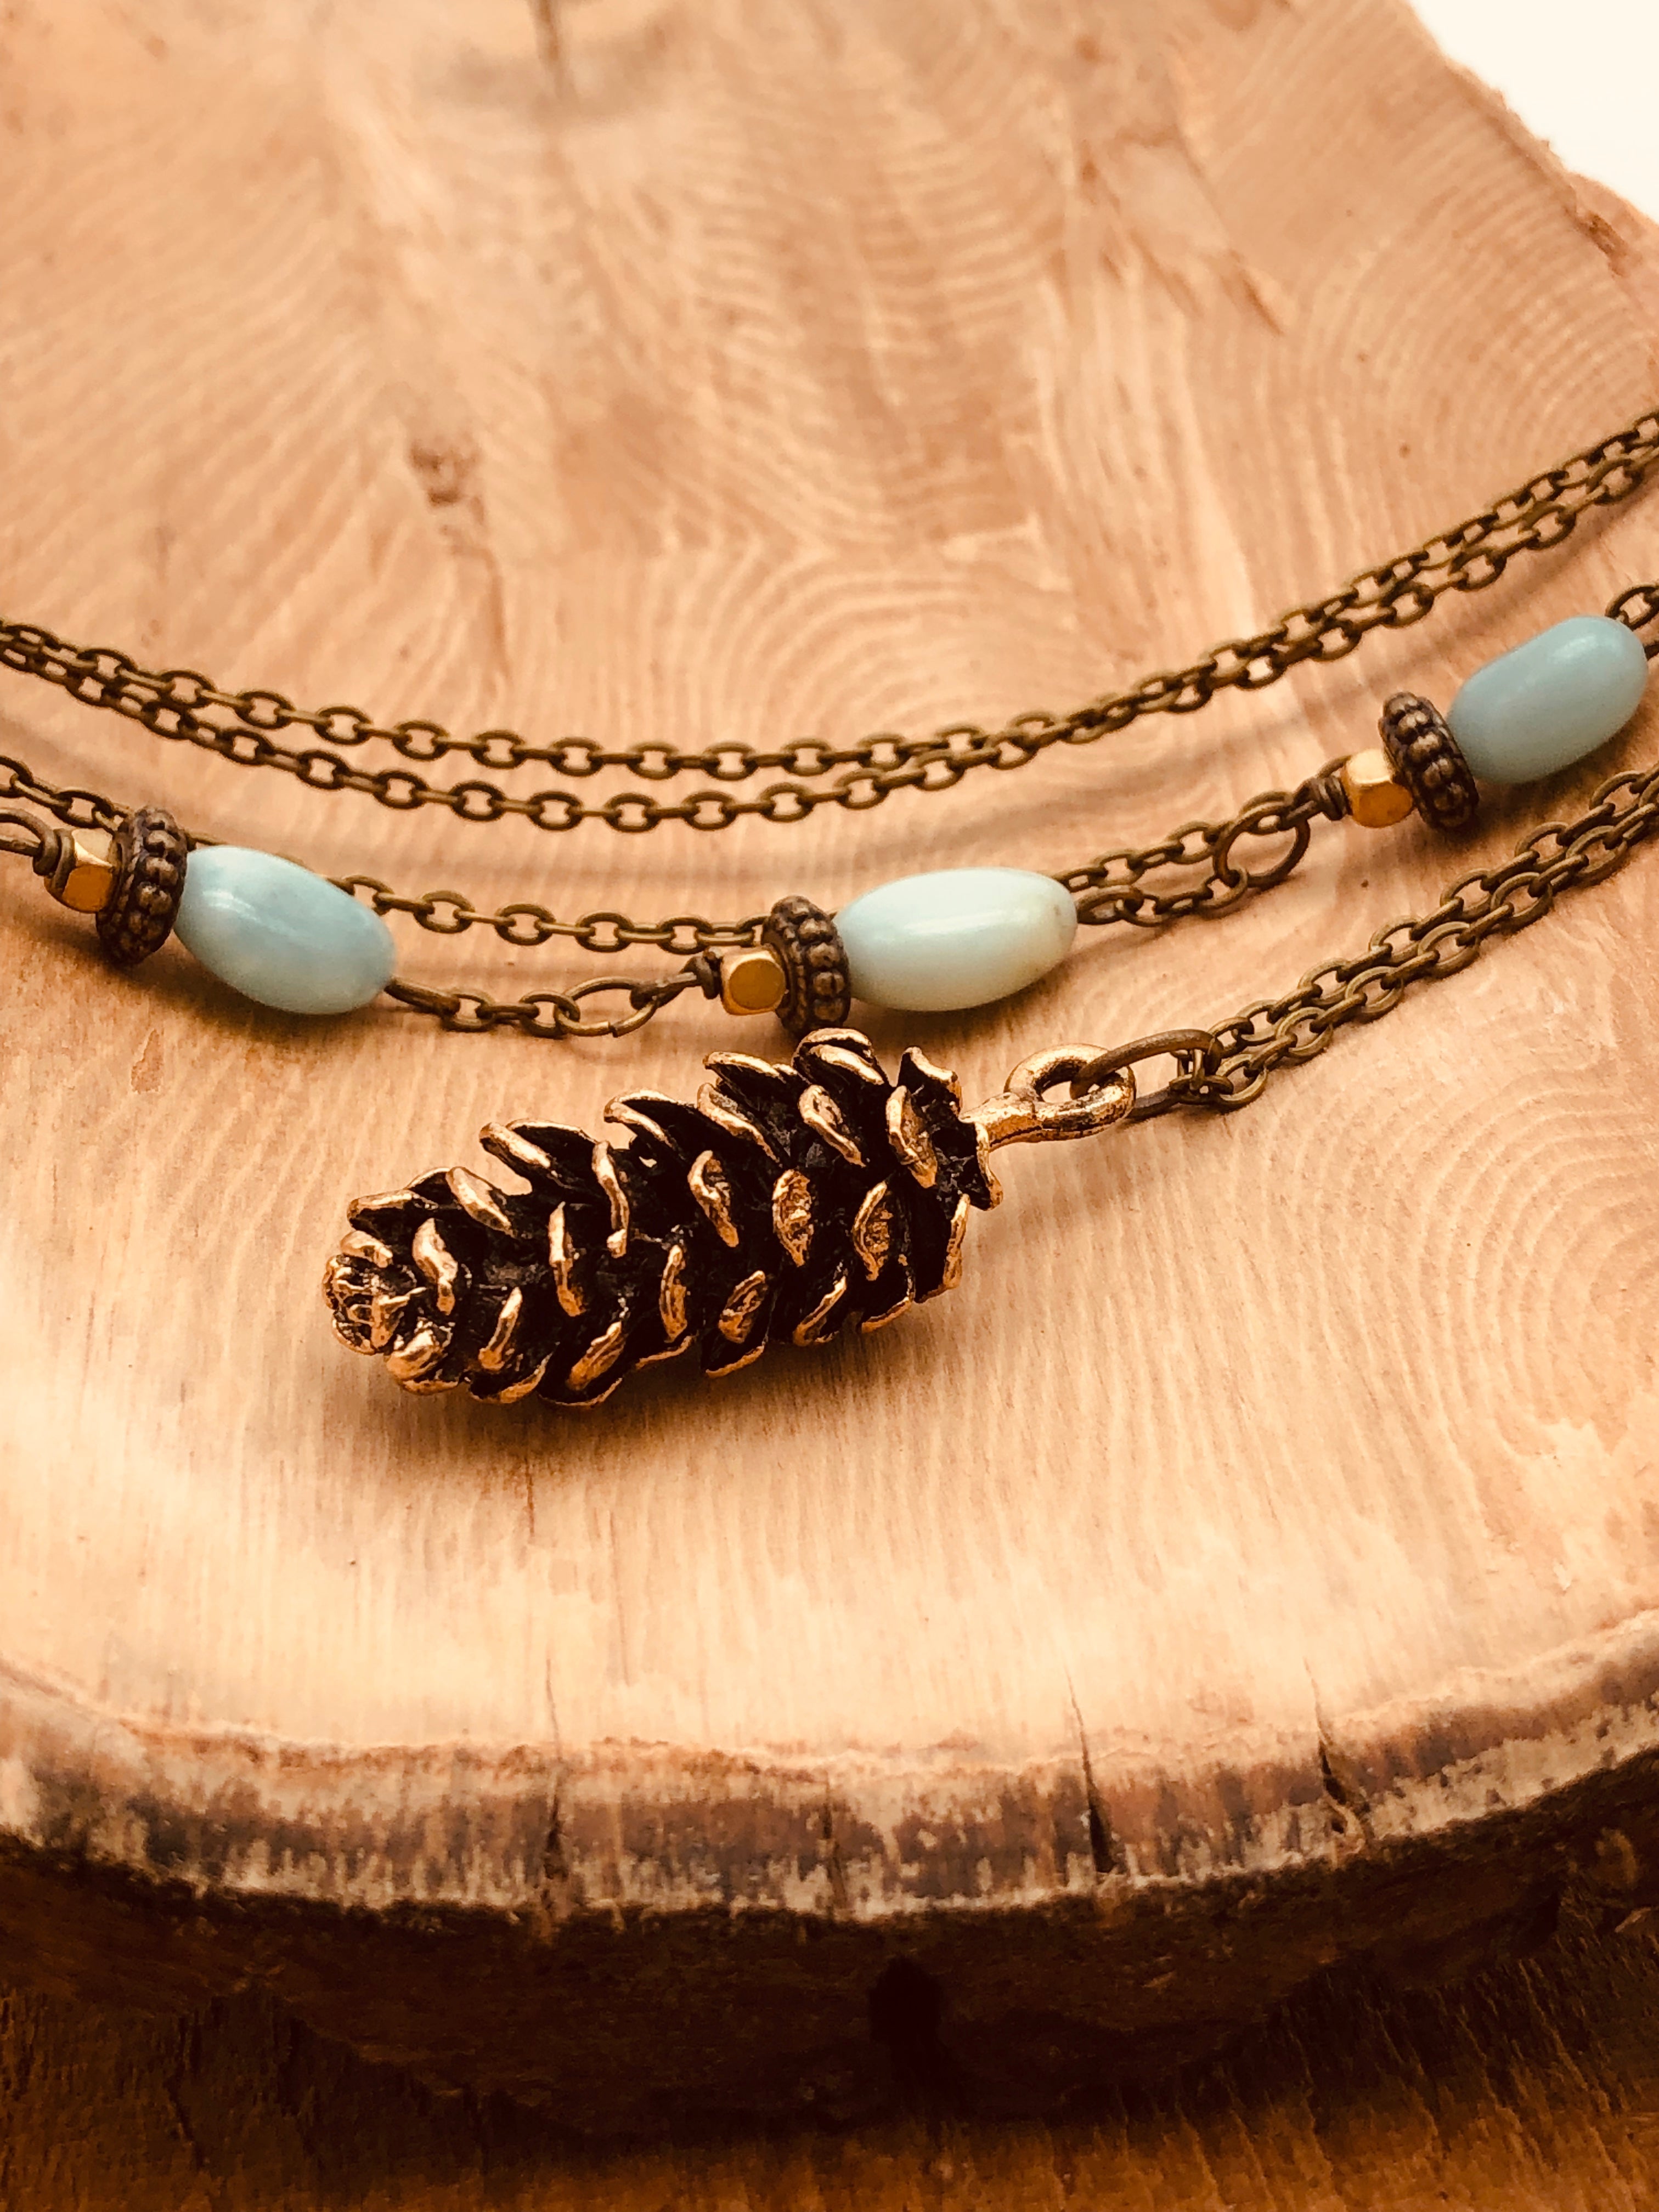 Long bronze necklace with realistic pinecone pendant and asymmetrical stones on chain. 